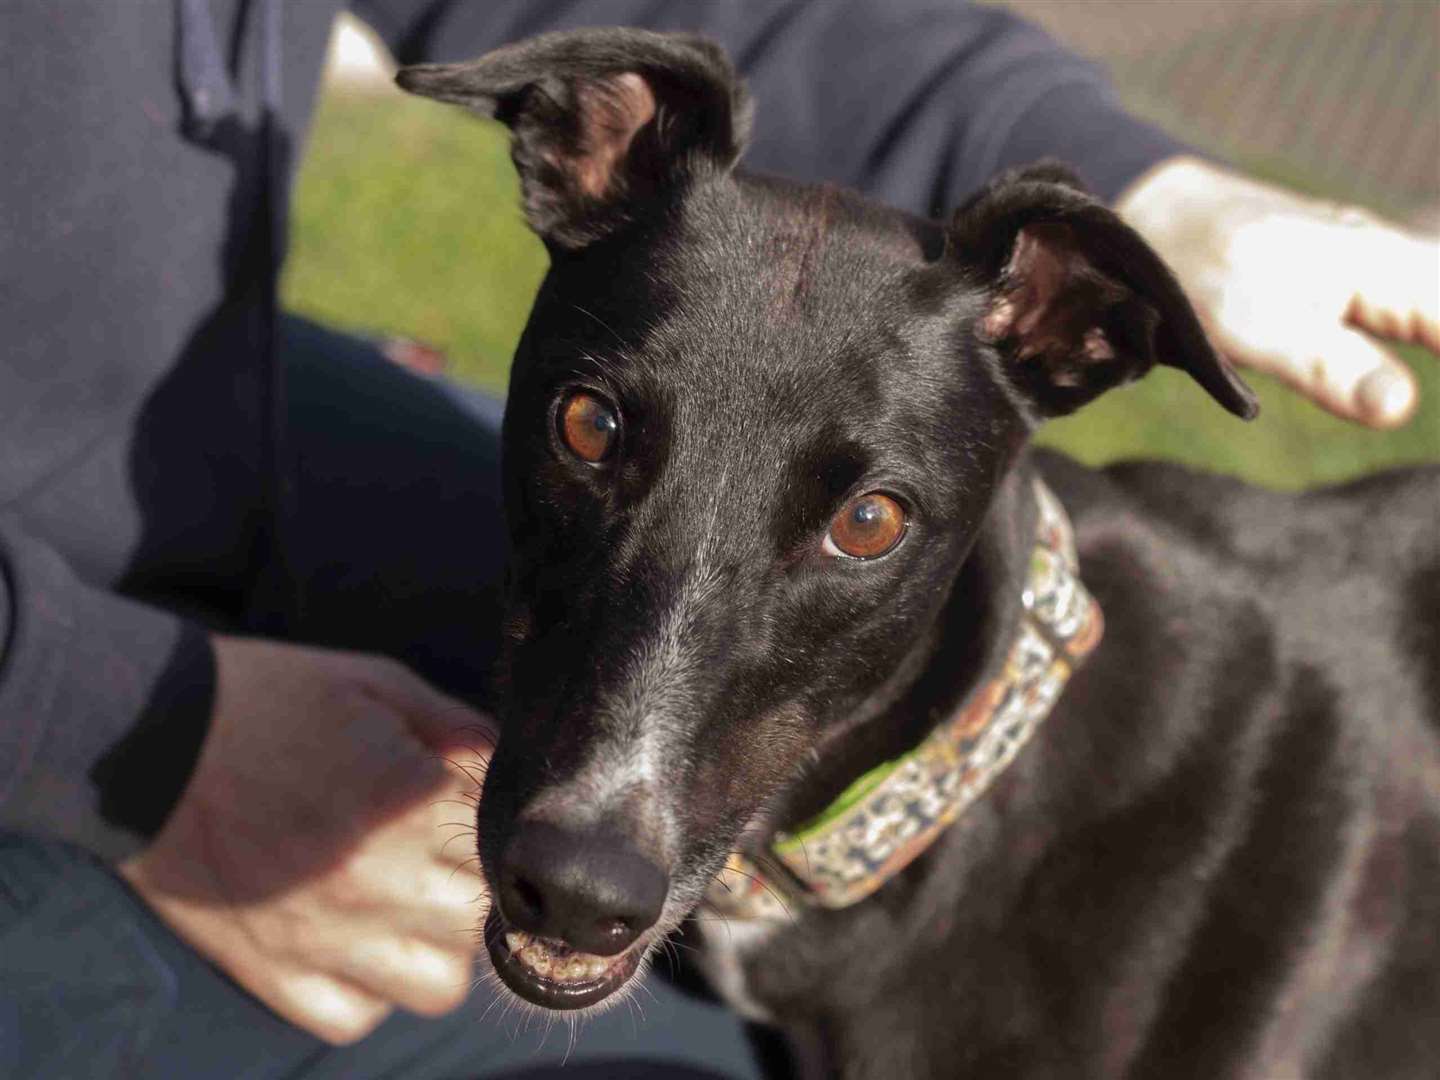 Bonnie is an ex racer who is now retired and looking for her forever home